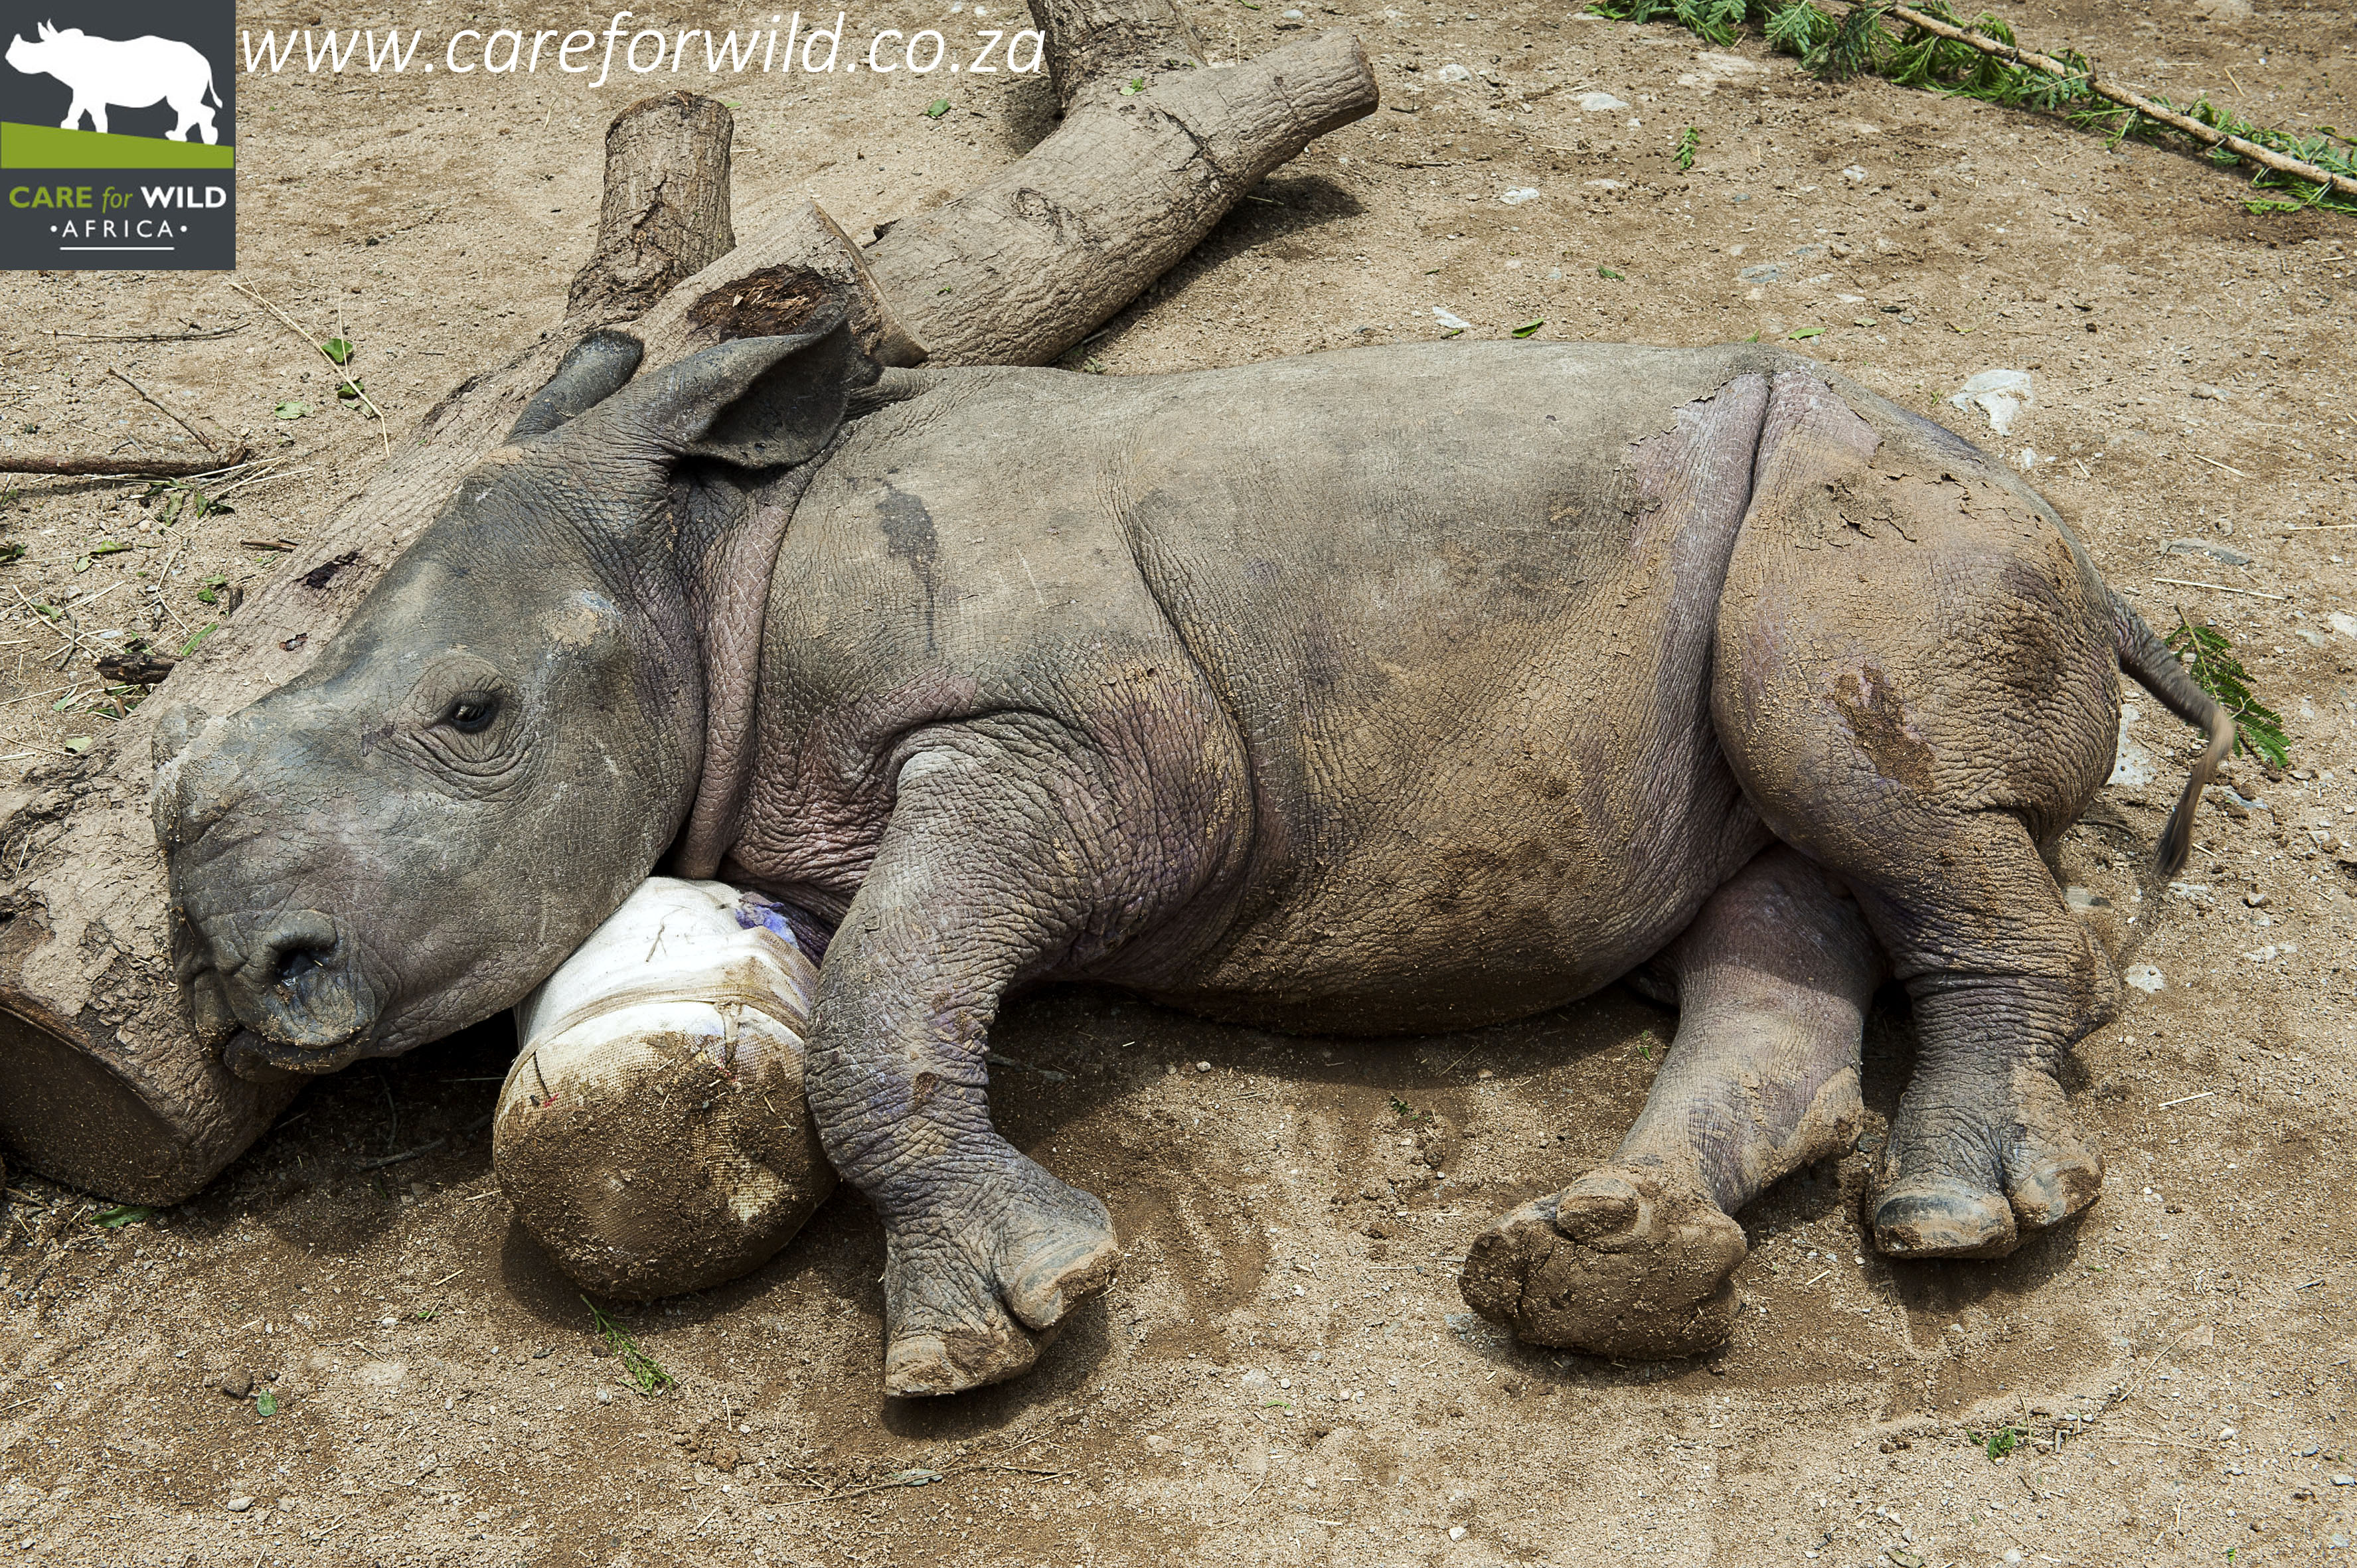 She was just 12 weeks old when her mother was poached. She was covered in ticks, and had a badly injured leg! She’s doing much better now!